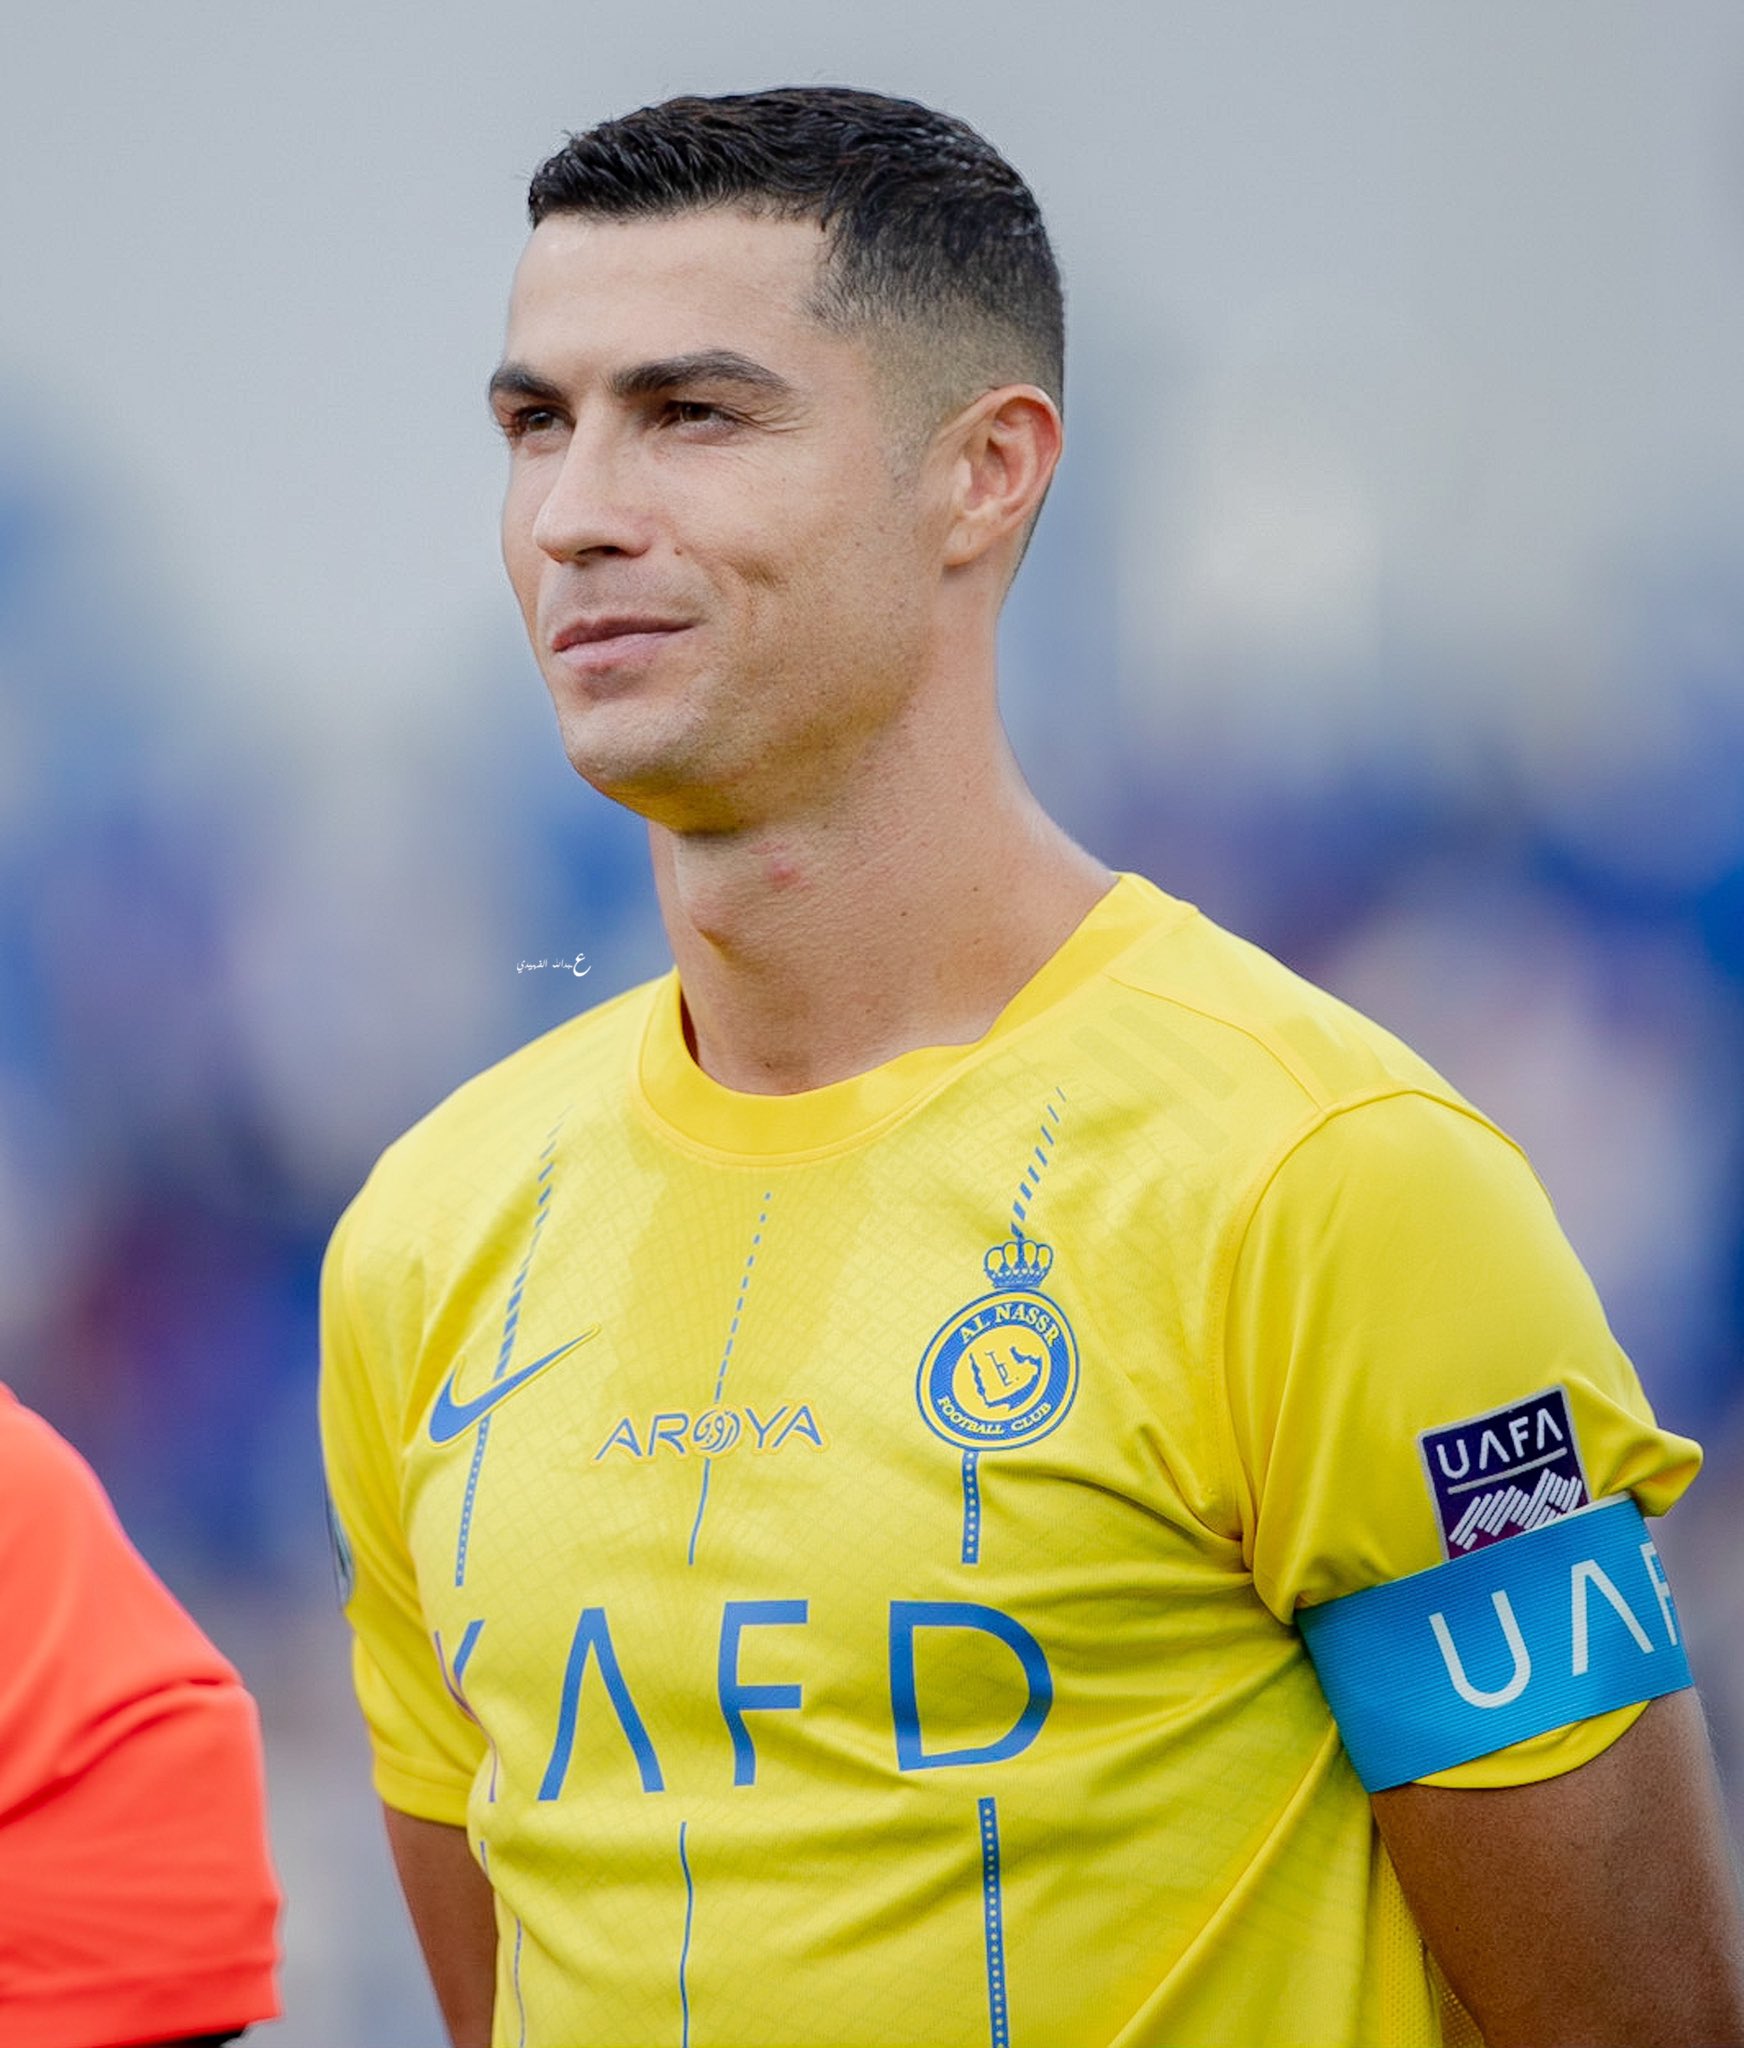 Al-Nassr captain Cristiano Ronaldo's viral outburst gets hilariously  trolled by Ryanair - Culture